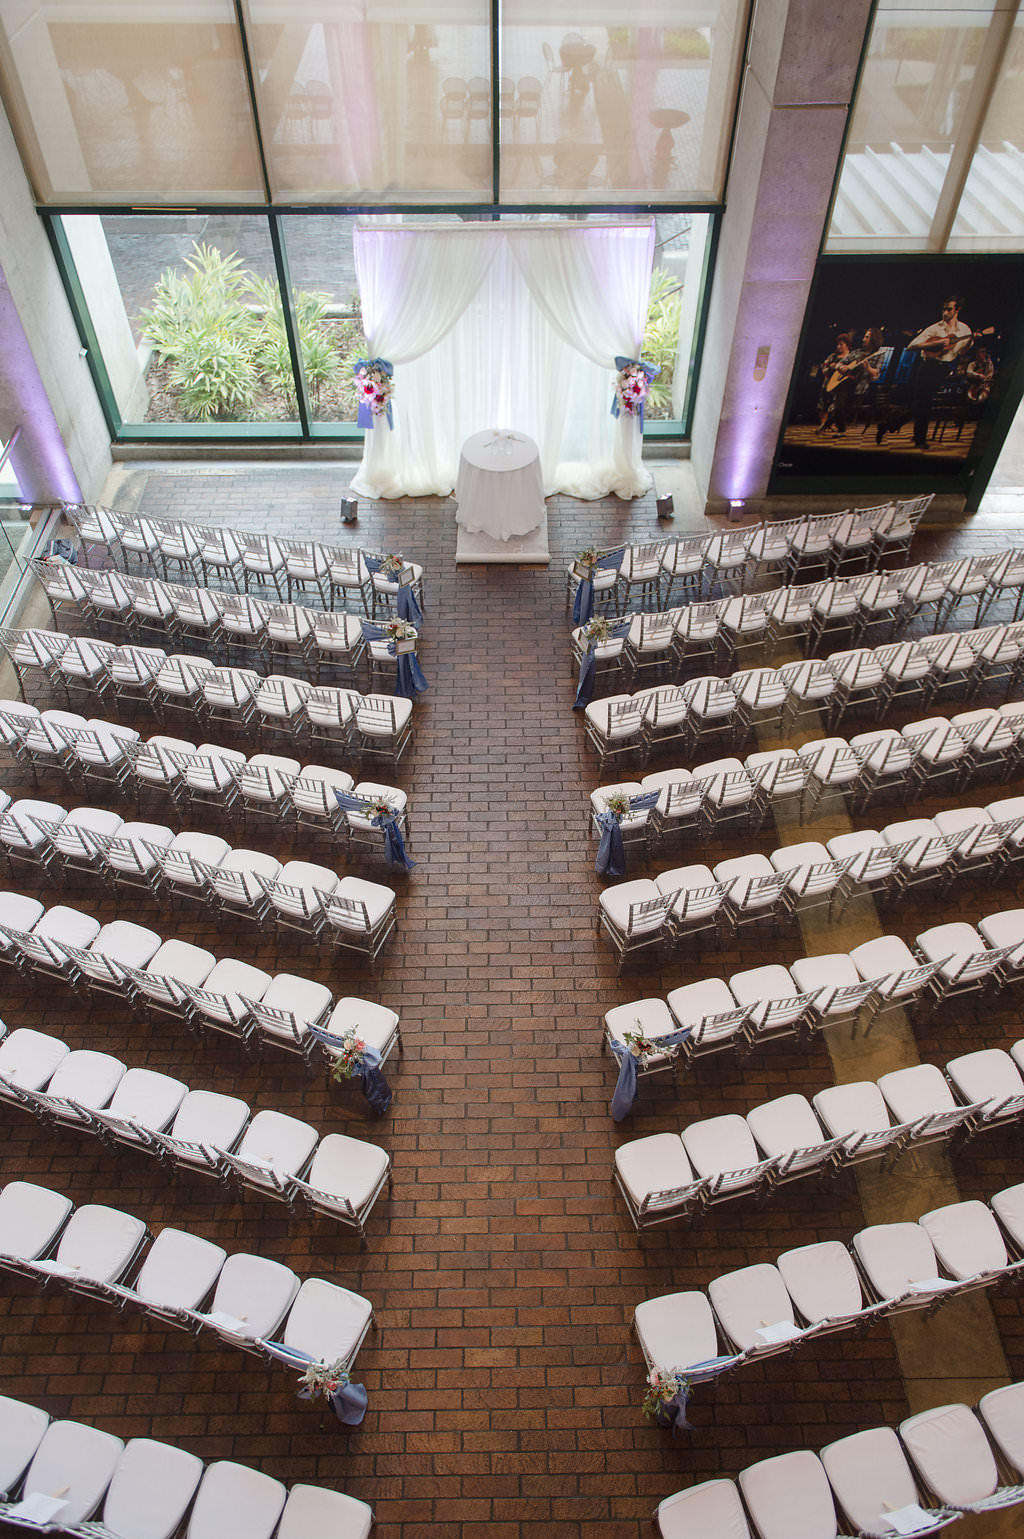 Wedding Ceremony Decor, Silver Chiavari Chairs, Arch with White Draping and Floral Bouquets | Tampa Bay Photographer Marc Edwards Photography | Tampa Venue Straz Center